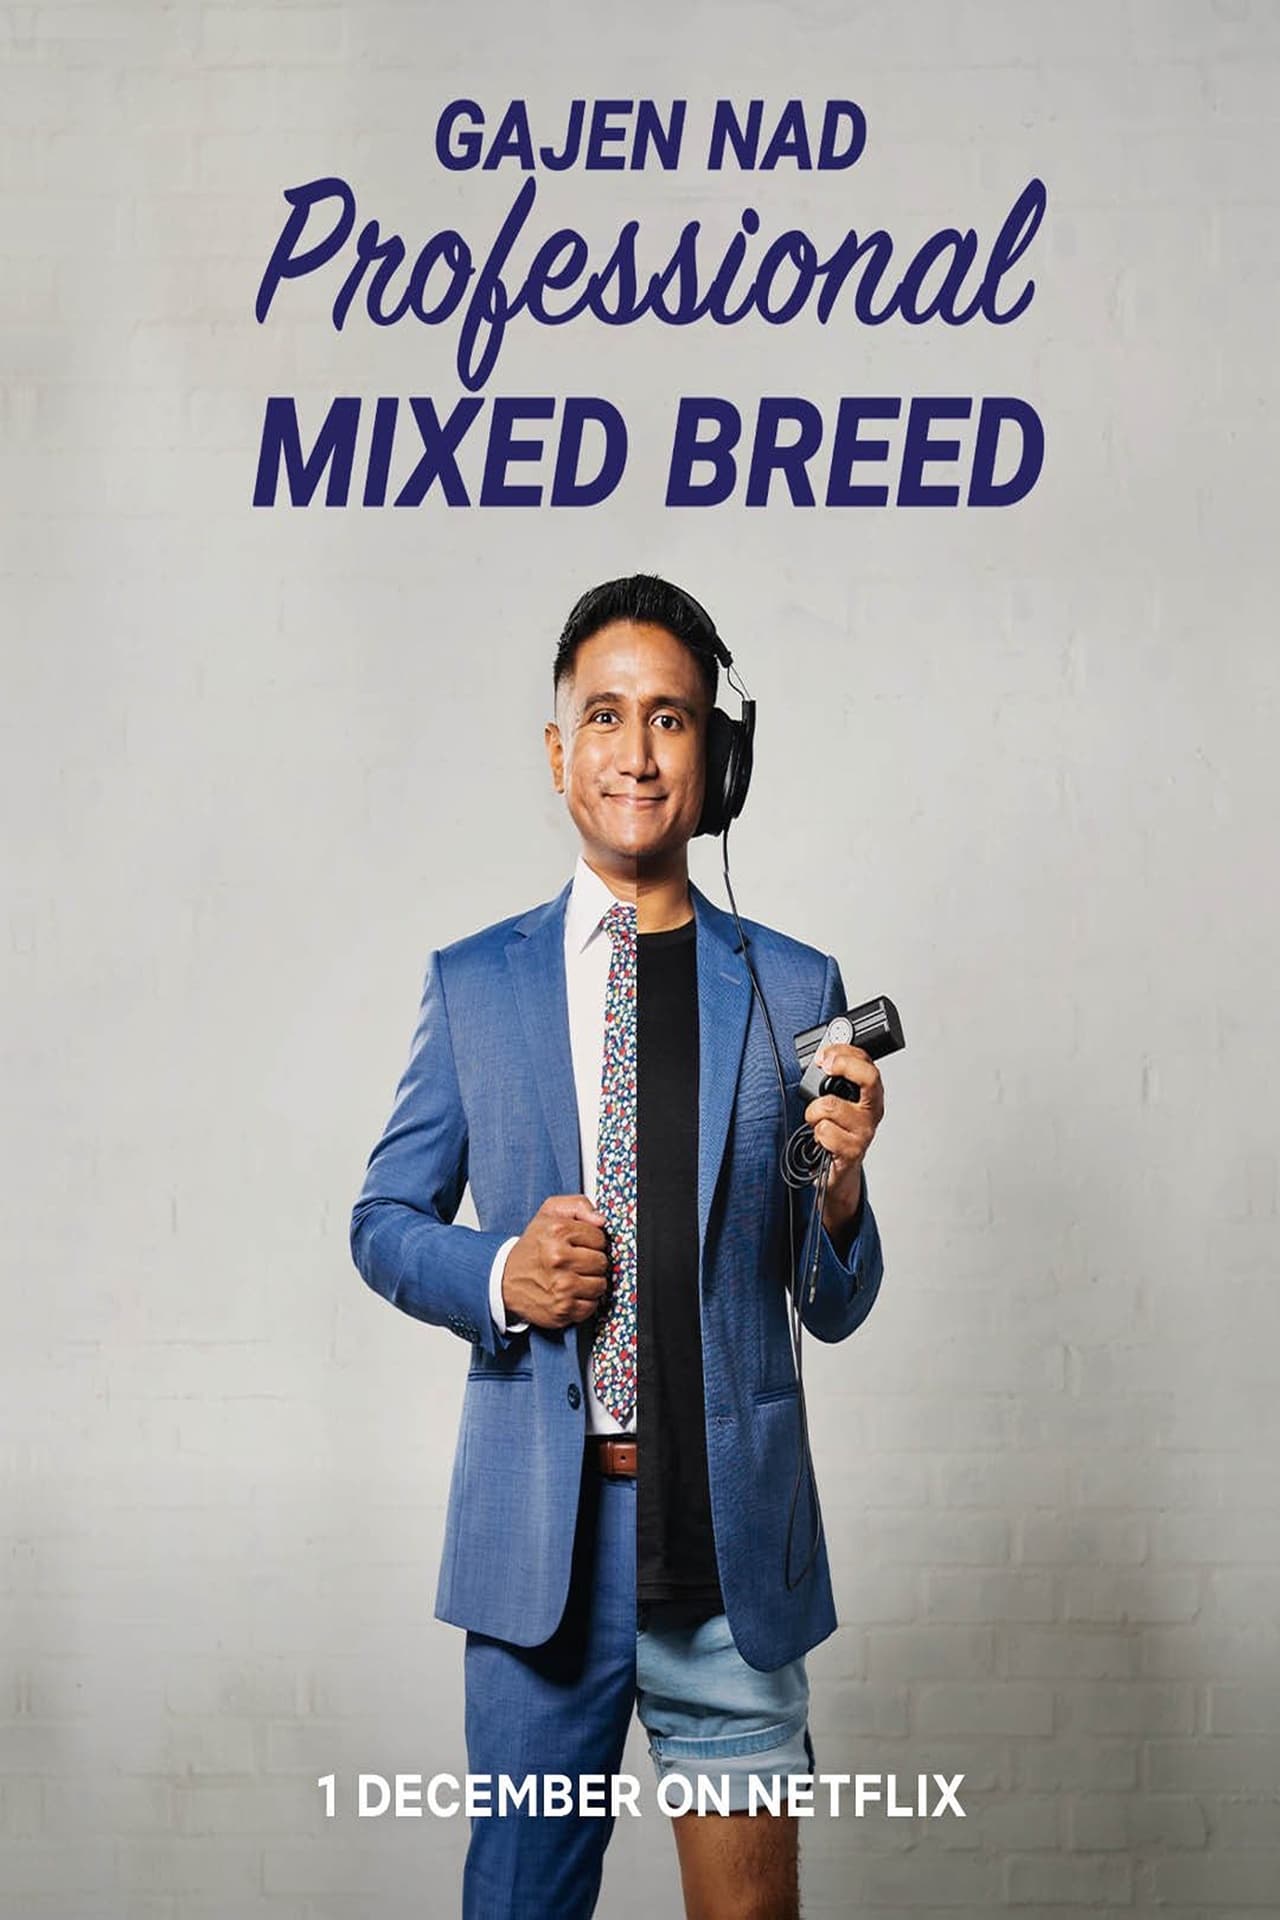 Gajen Nad’s first ever stand-up comedy special. Touching on topics such as family, career, work, communication, travelling, animals, love, relationships, and education, the jokes are told professionally by a professional, in a mixed manner, to breed laughter. Hence, Professional Mixed Breed.